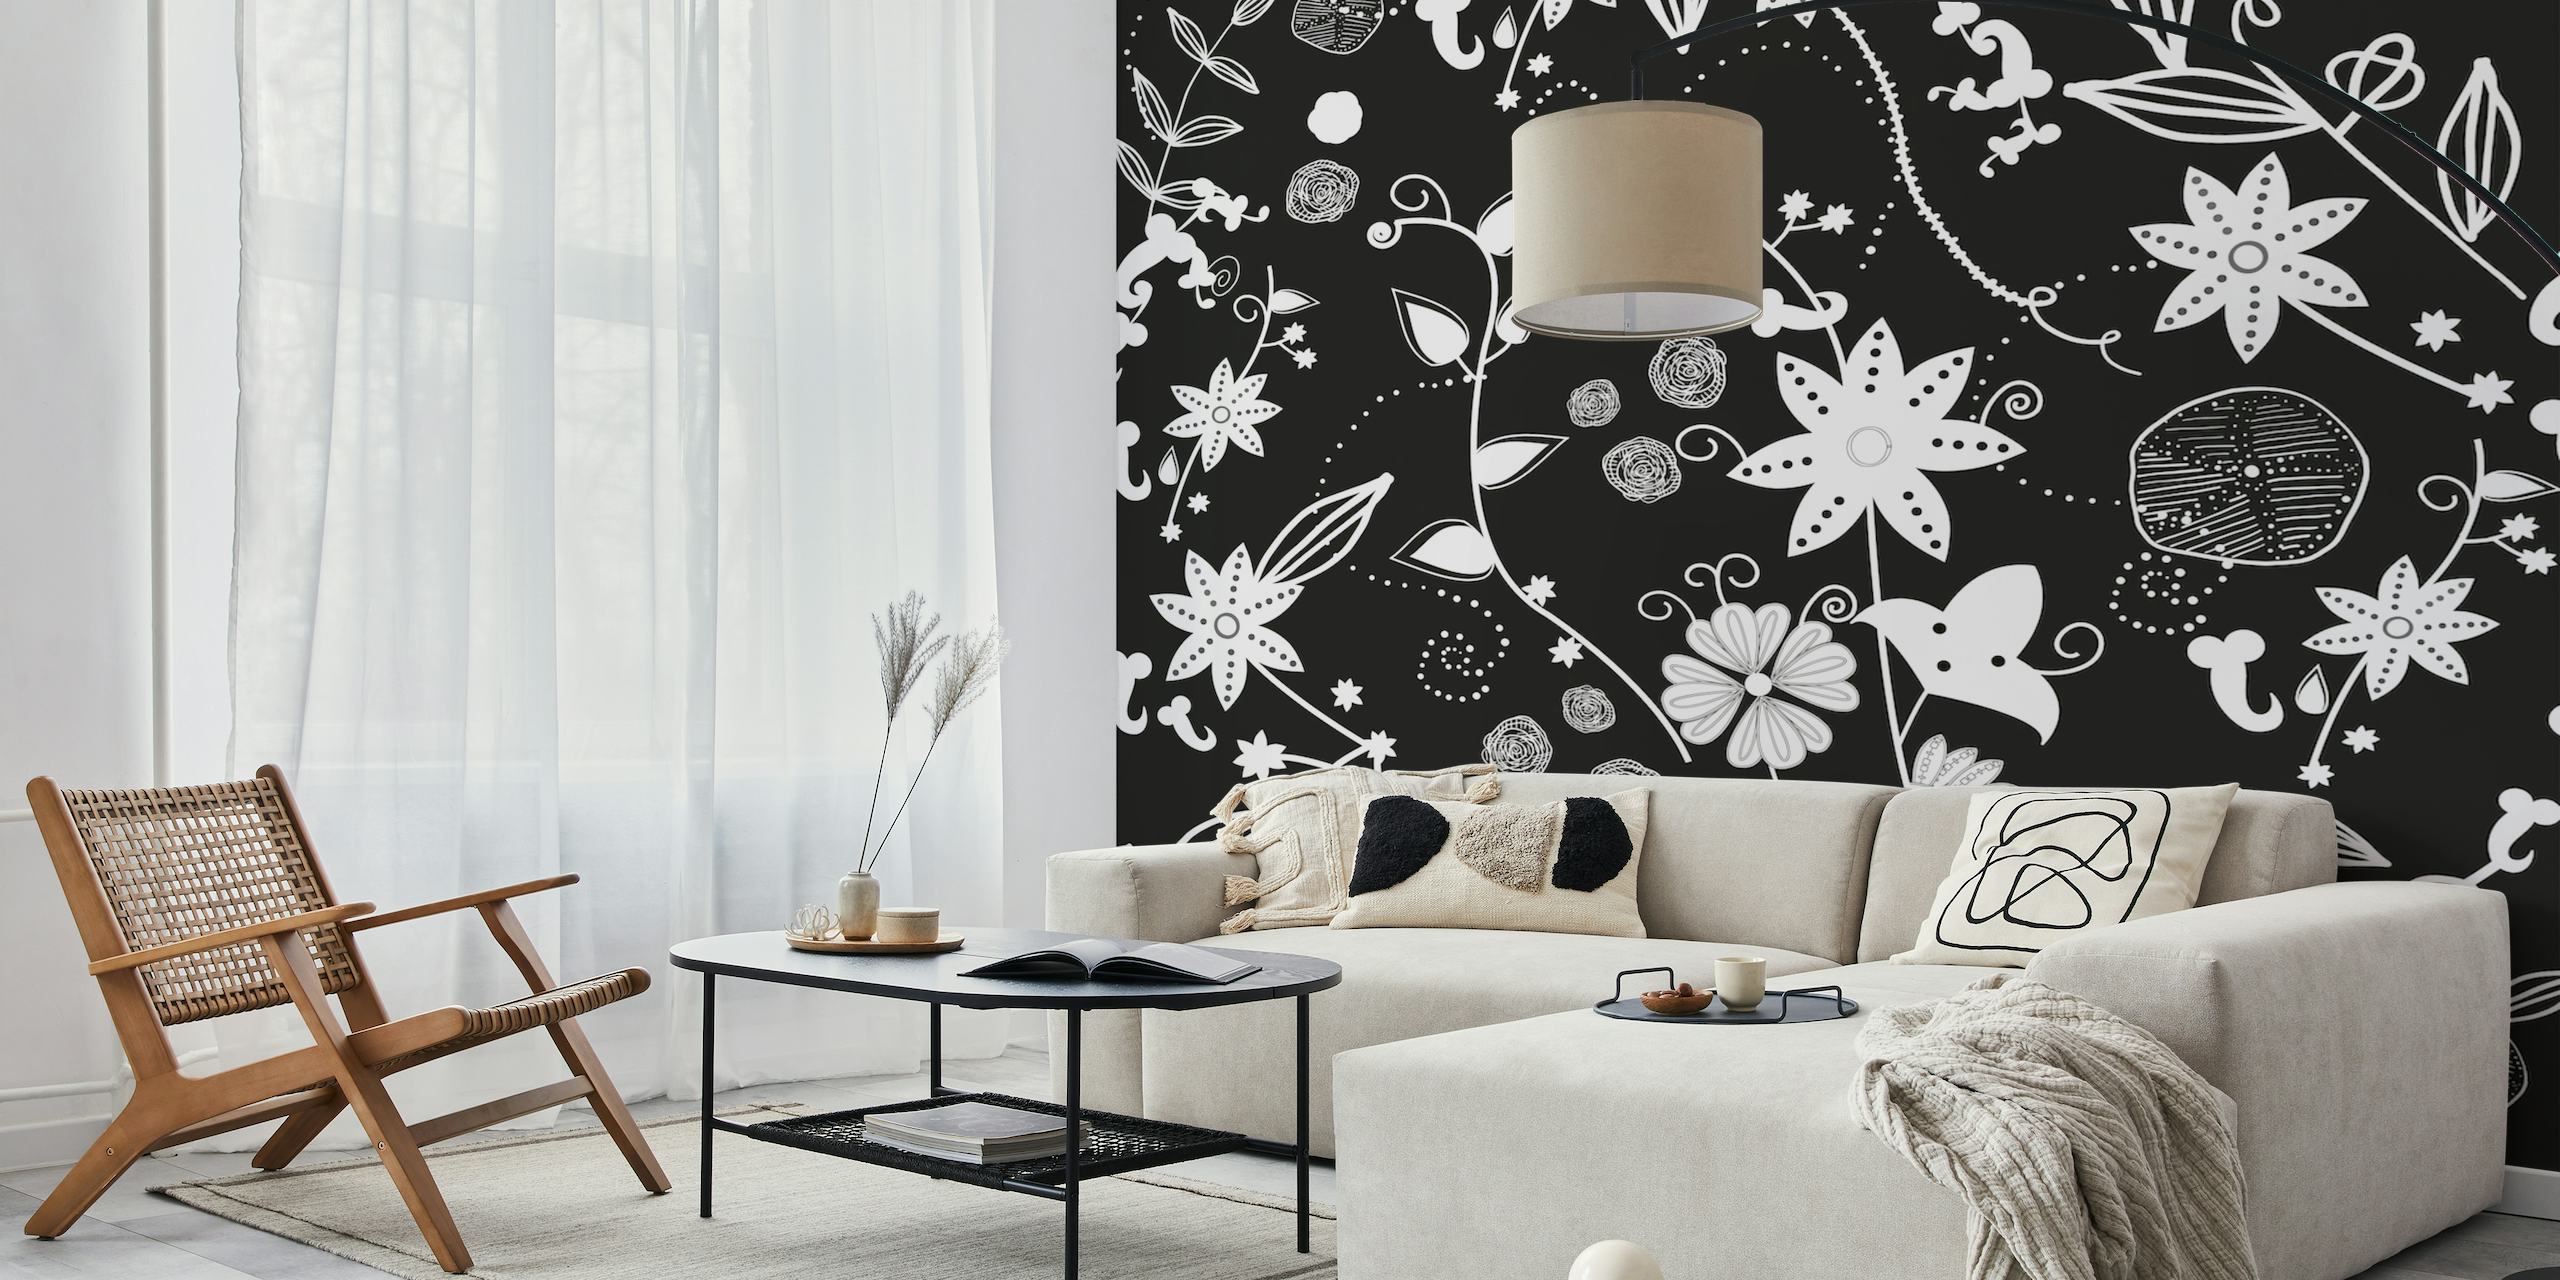 Black and white boho-style floral wall mural